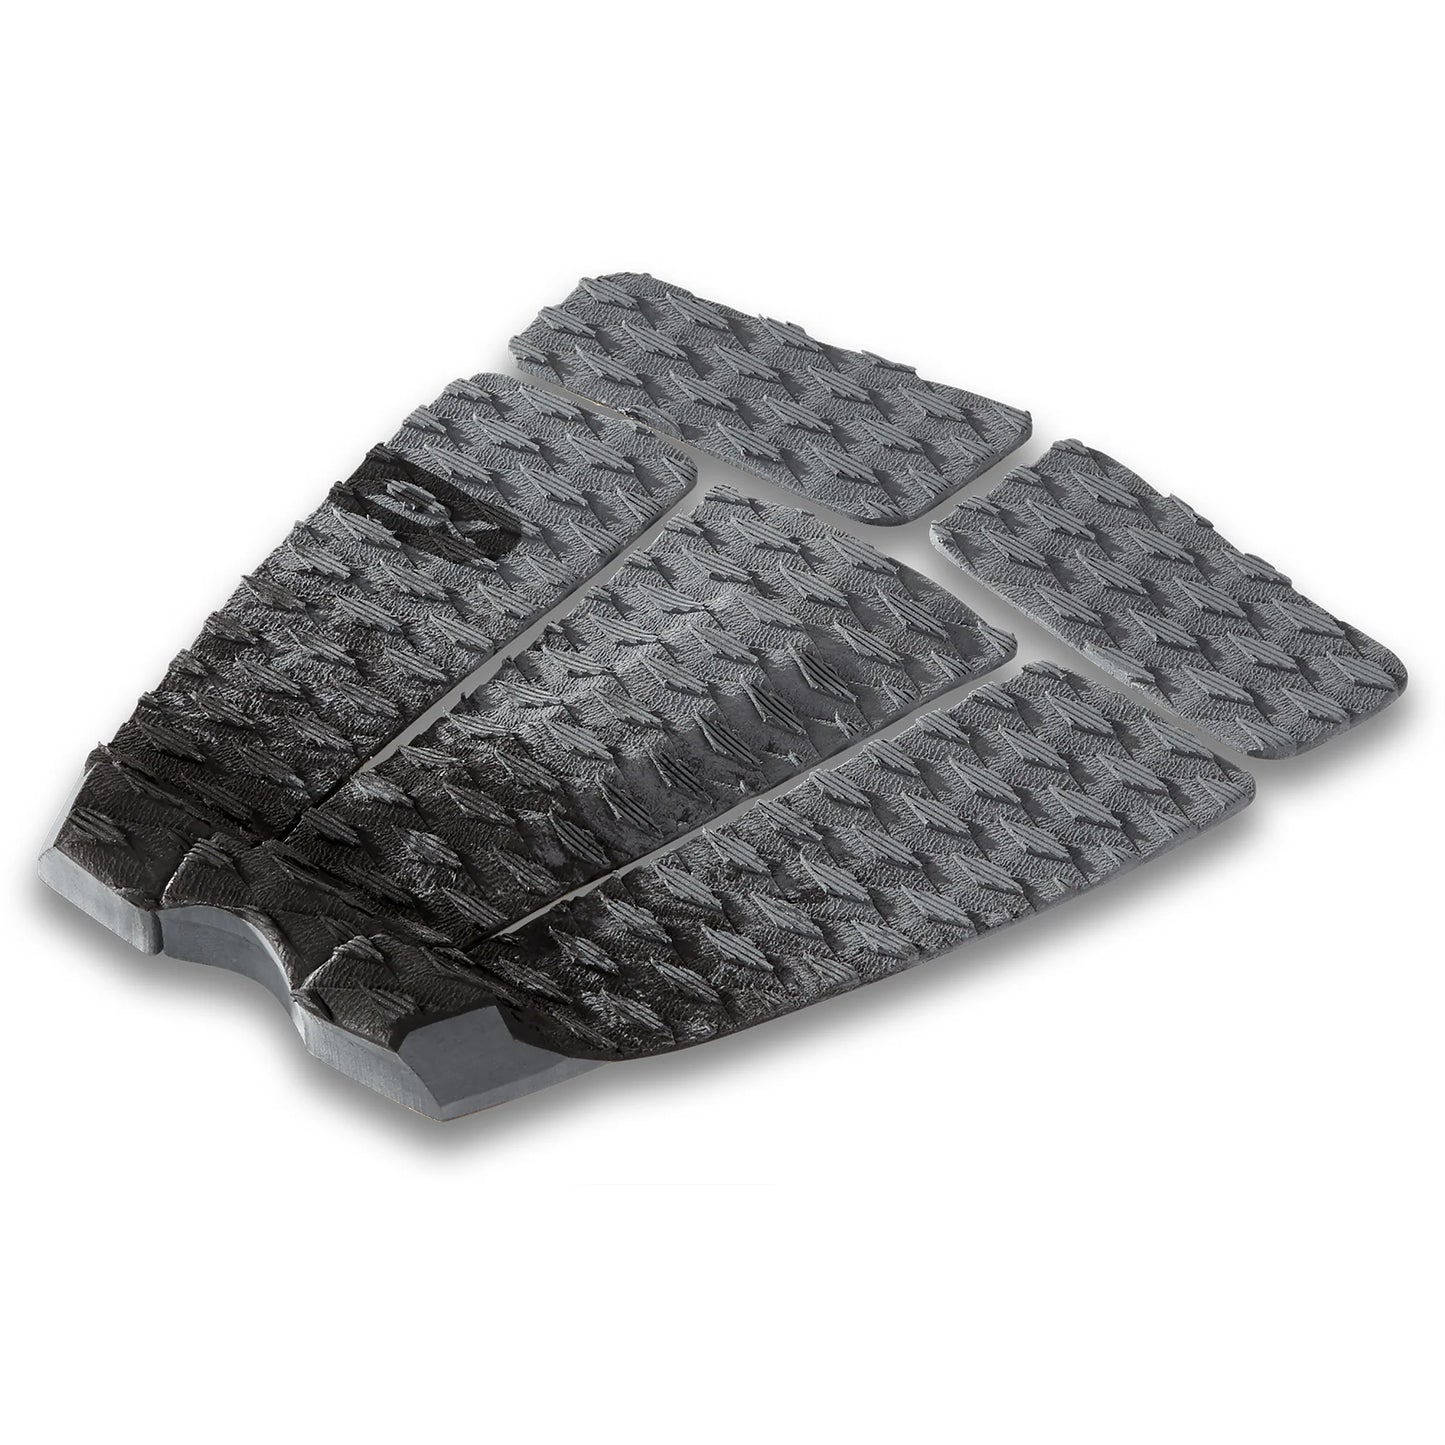 Bruce Irons Pro Surf Traction Pad - Various Colors